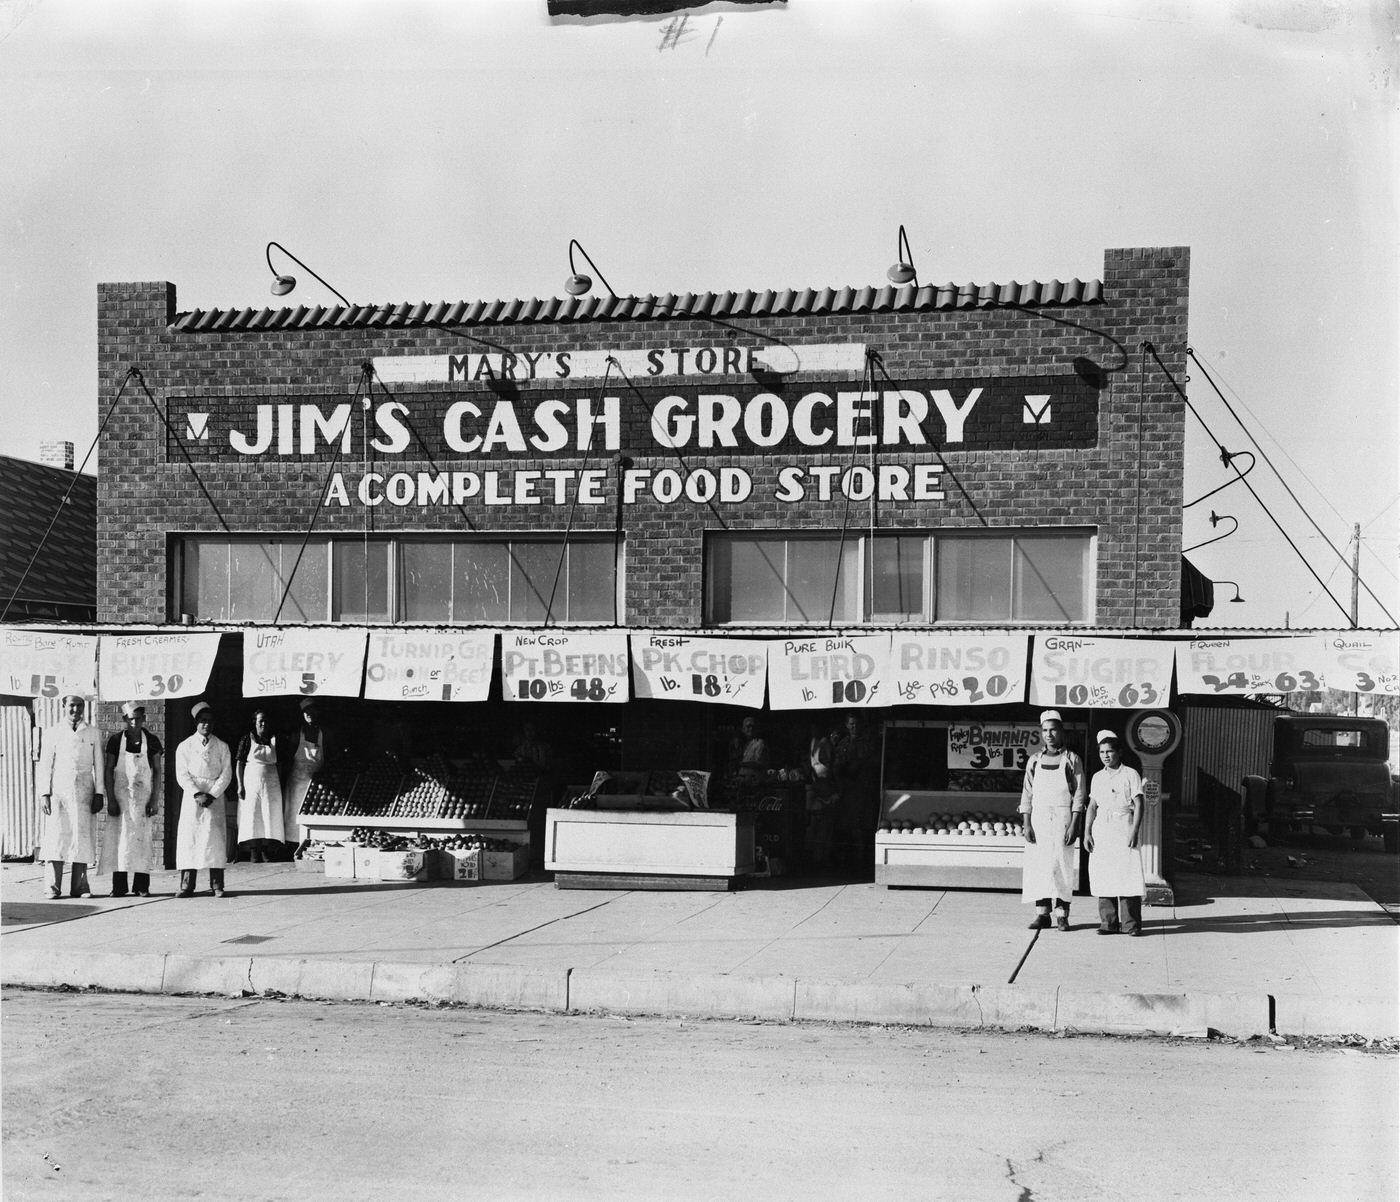 Employees in Front of Jim's Cash Grocery Store, 1930s